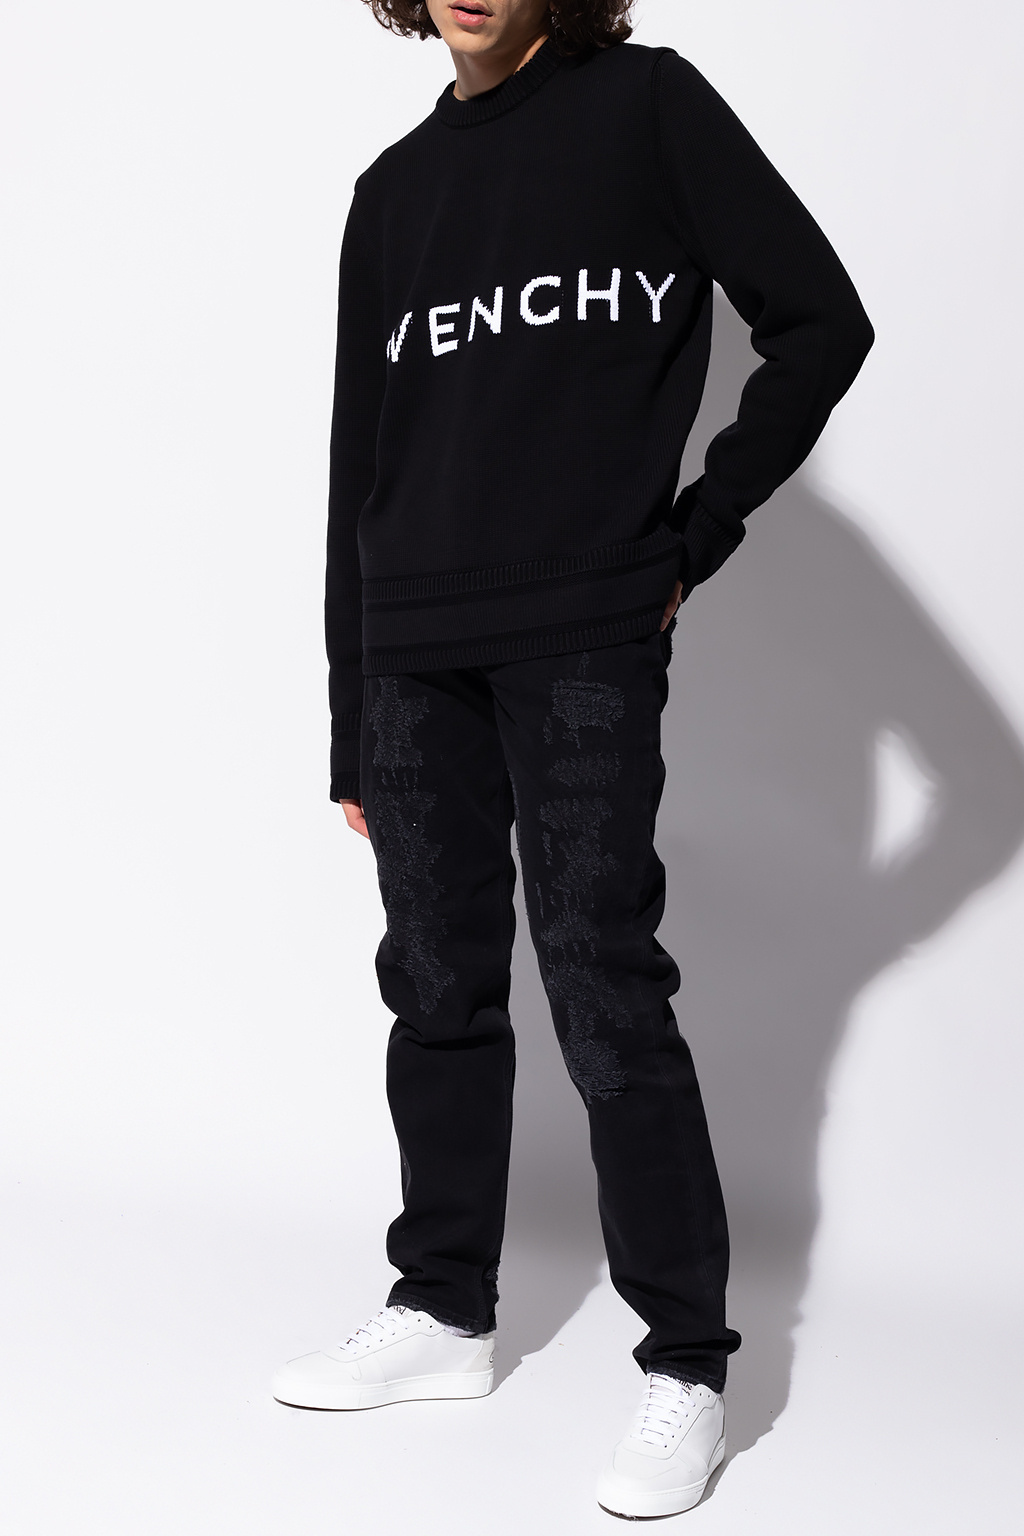 Givenchy Givenchy Straight Leg Jeans